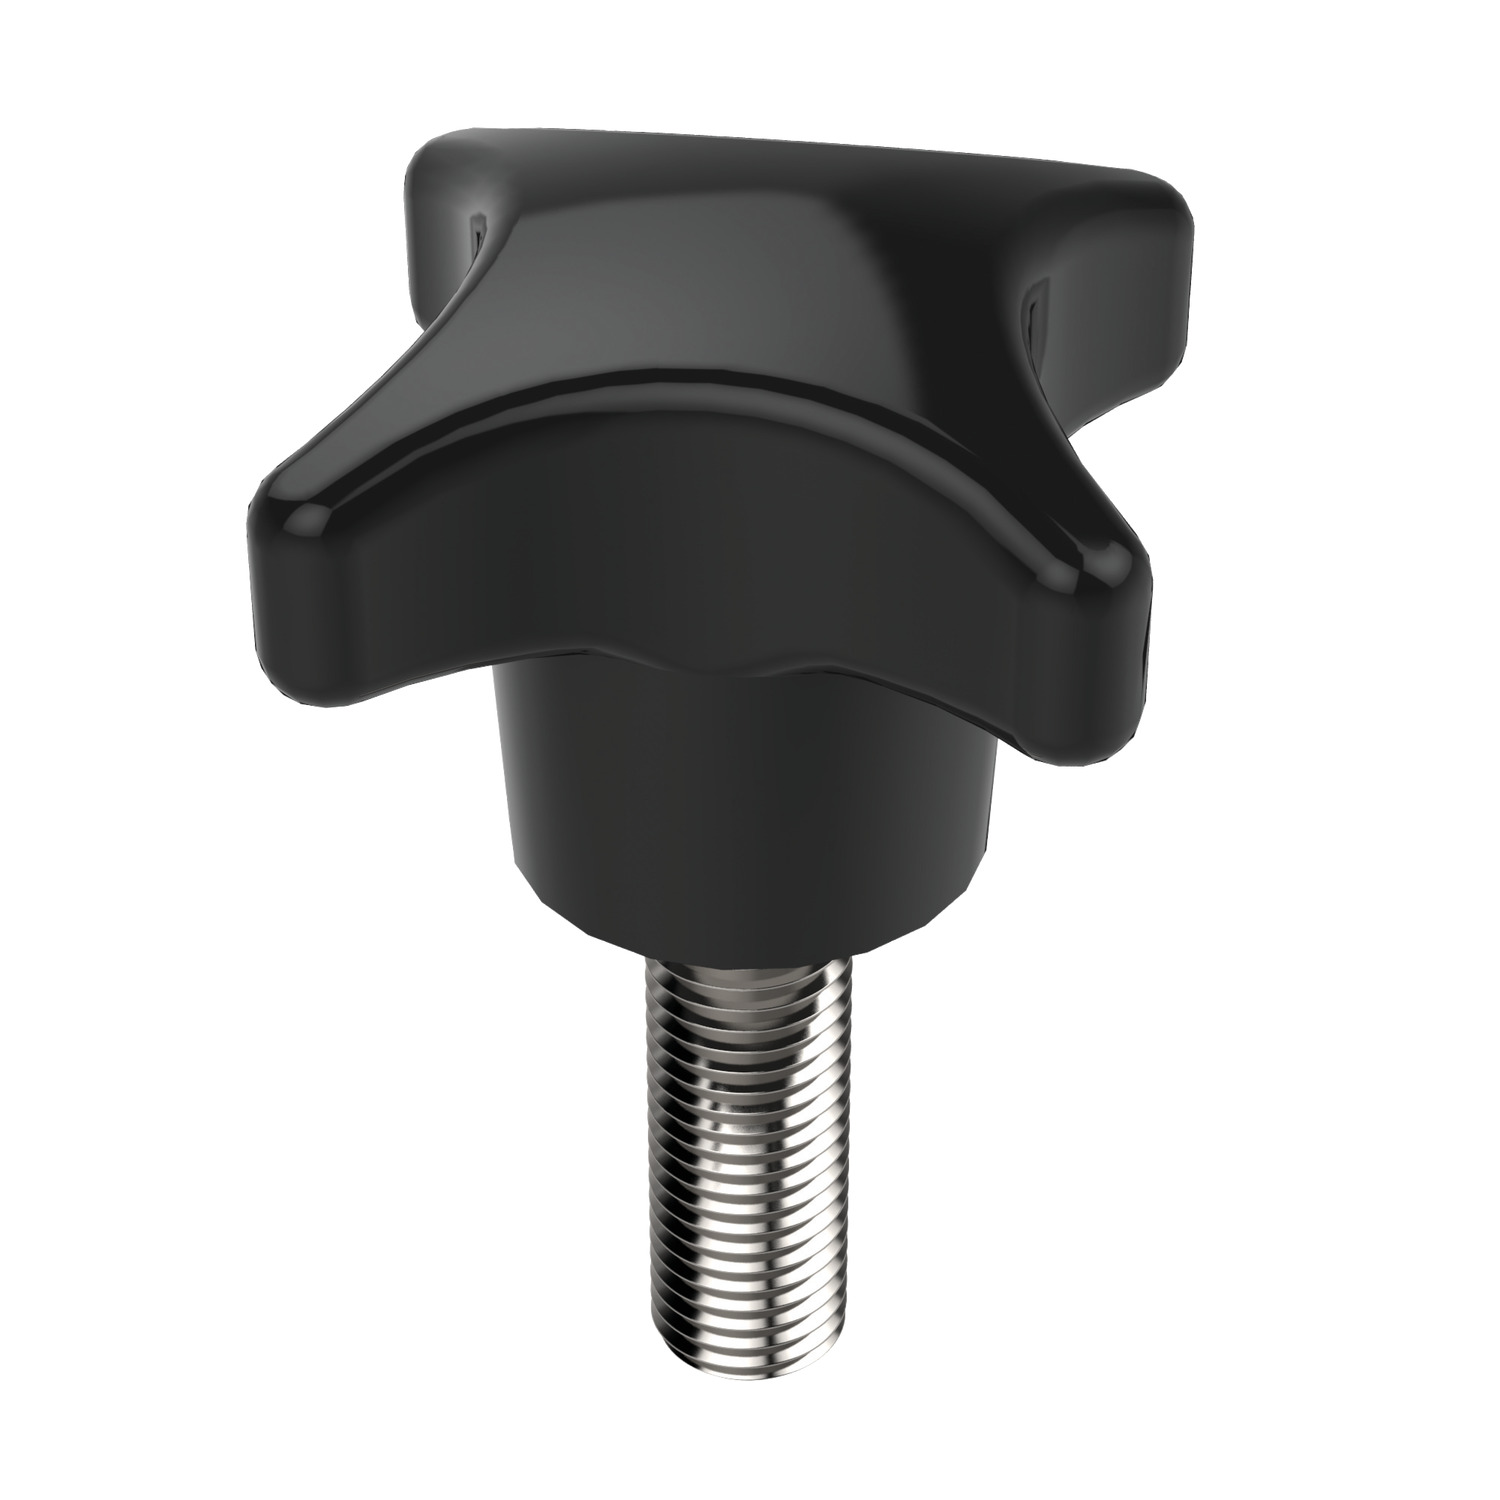 Palm Grips Screw material is steel, galvanised or stainless steel A2. Grip material is duroplast, black. Sold in multiples of 10.